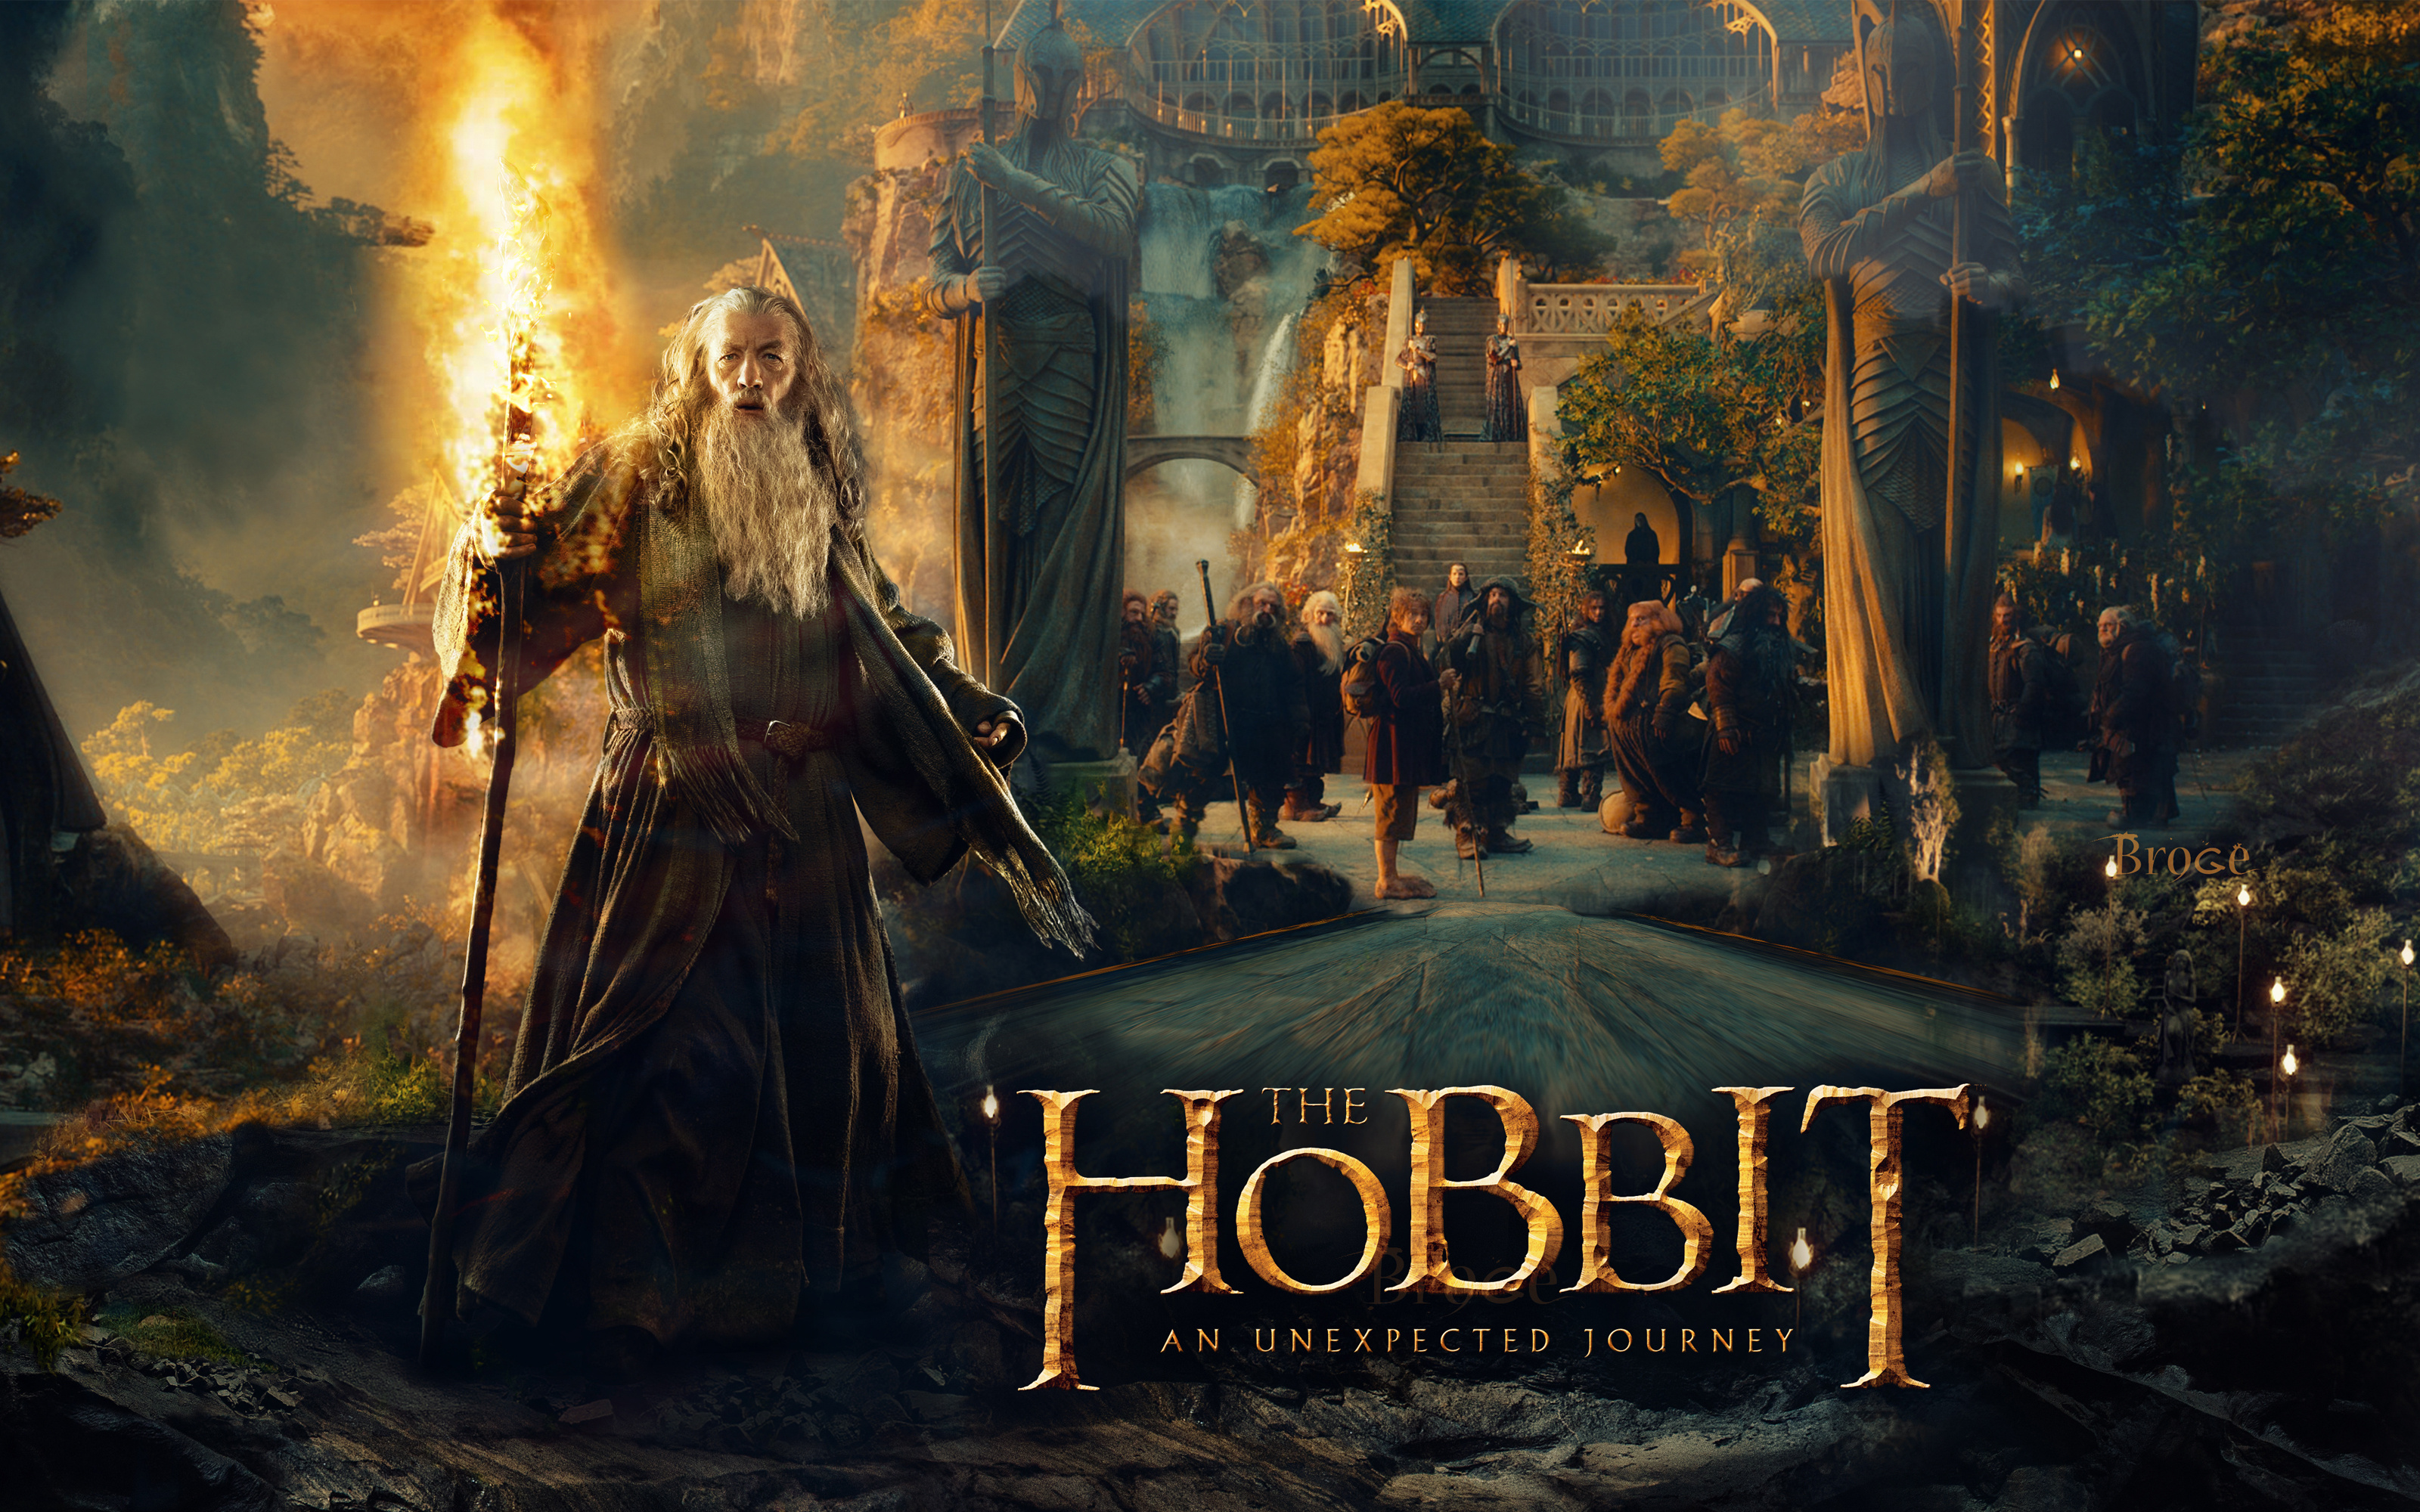 The Hobbit (Movie): Unexpected journey, The first installment, The Hobbit, Tolkien, Lord of the Rings. 3200x2000 HD Wallpaper.